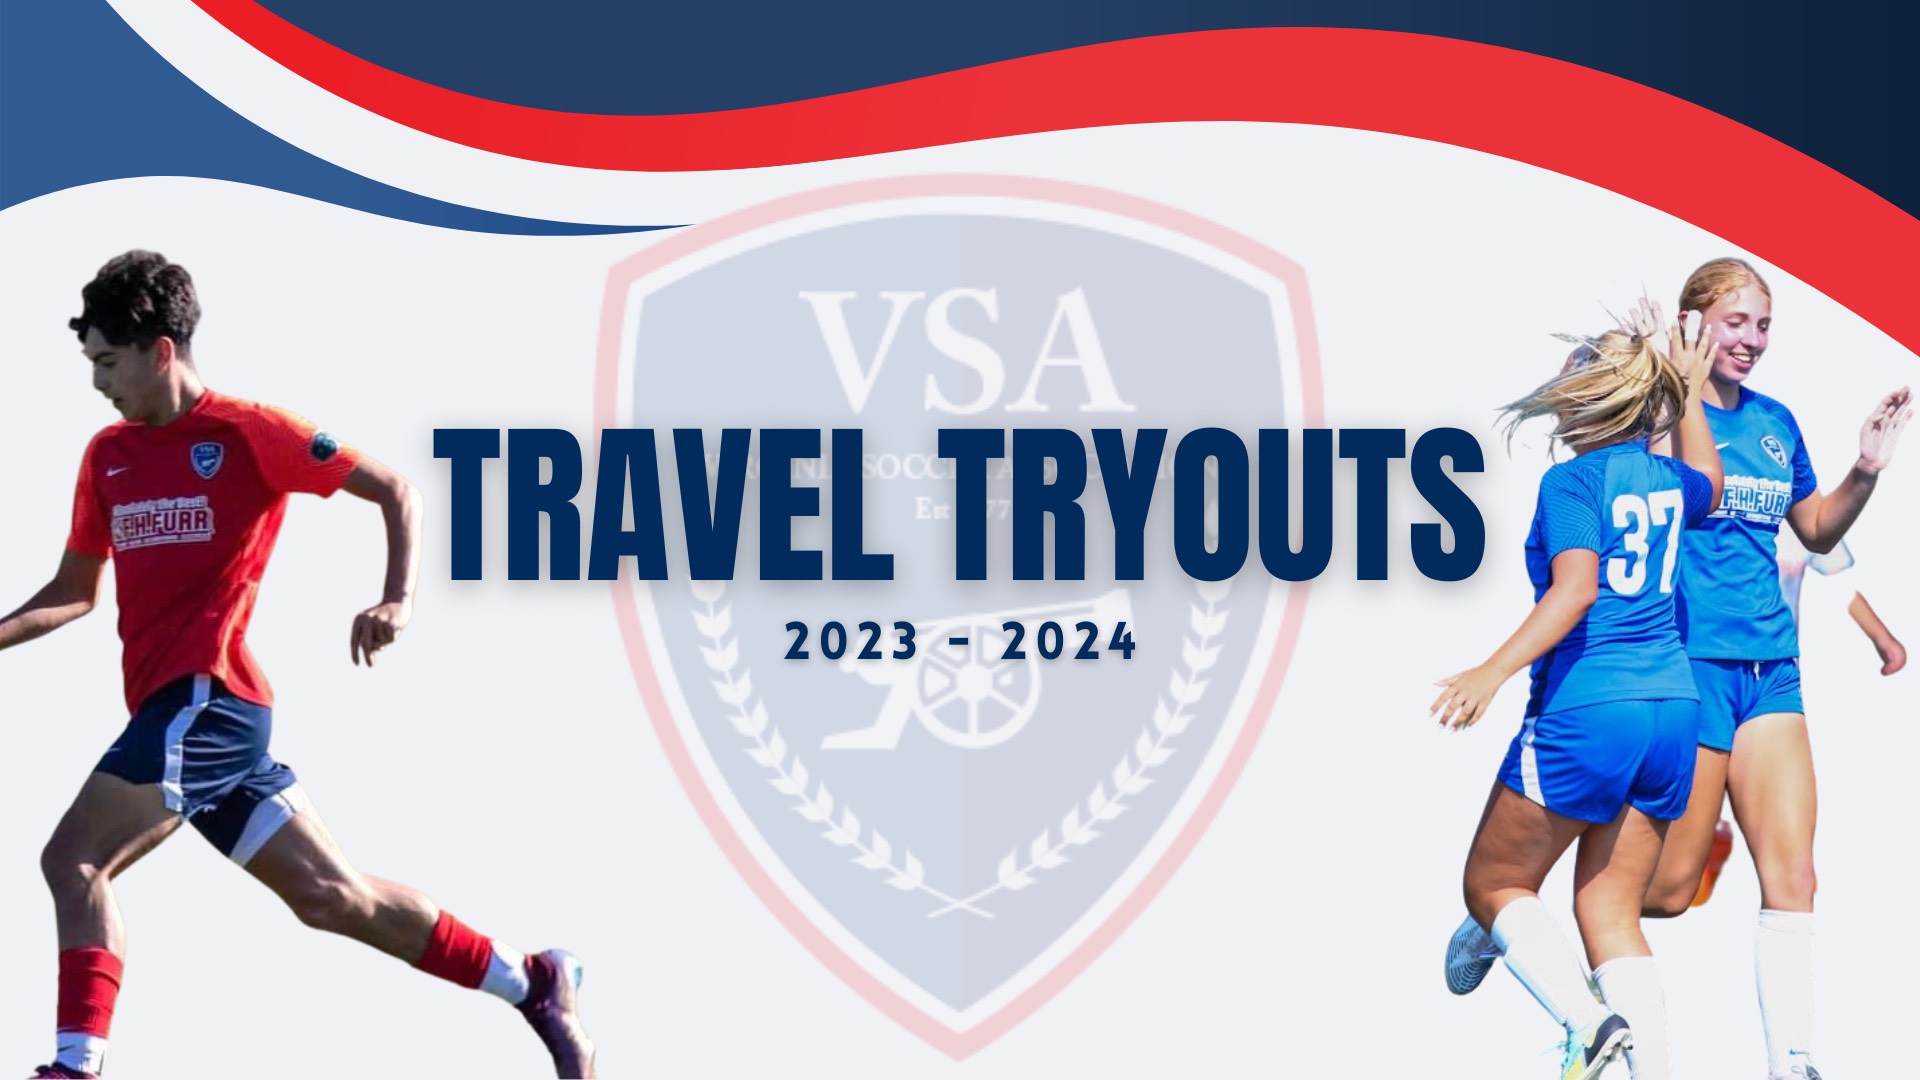 2023-2024 Tryouts